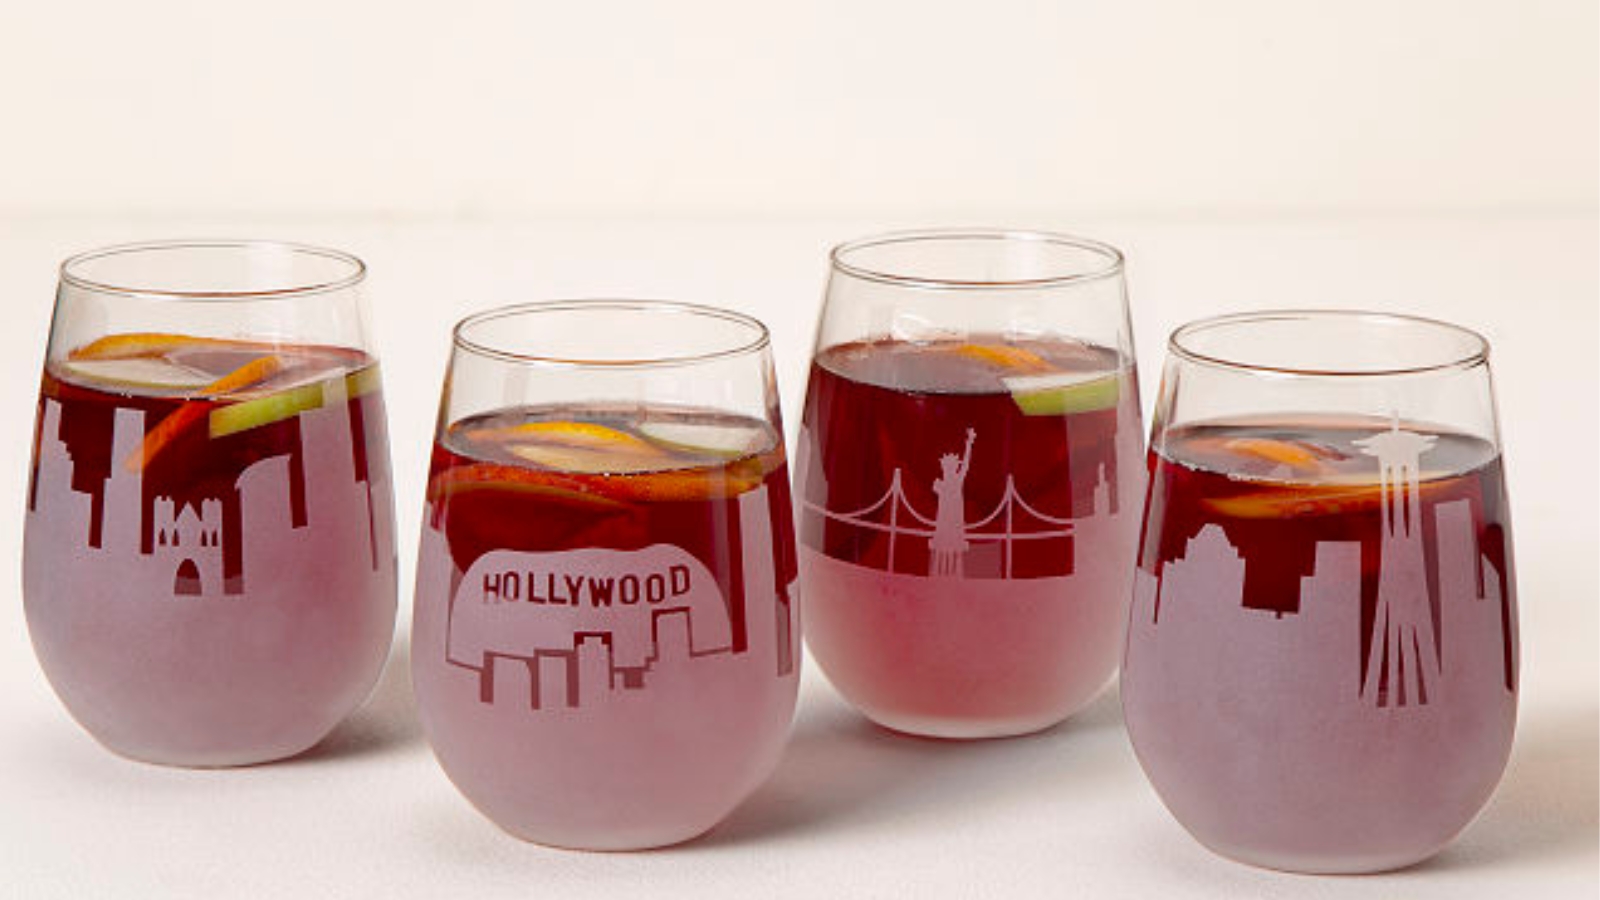 4 city skyline etched wine glasses as a wedding gift sparked the birth of charm city glassware series